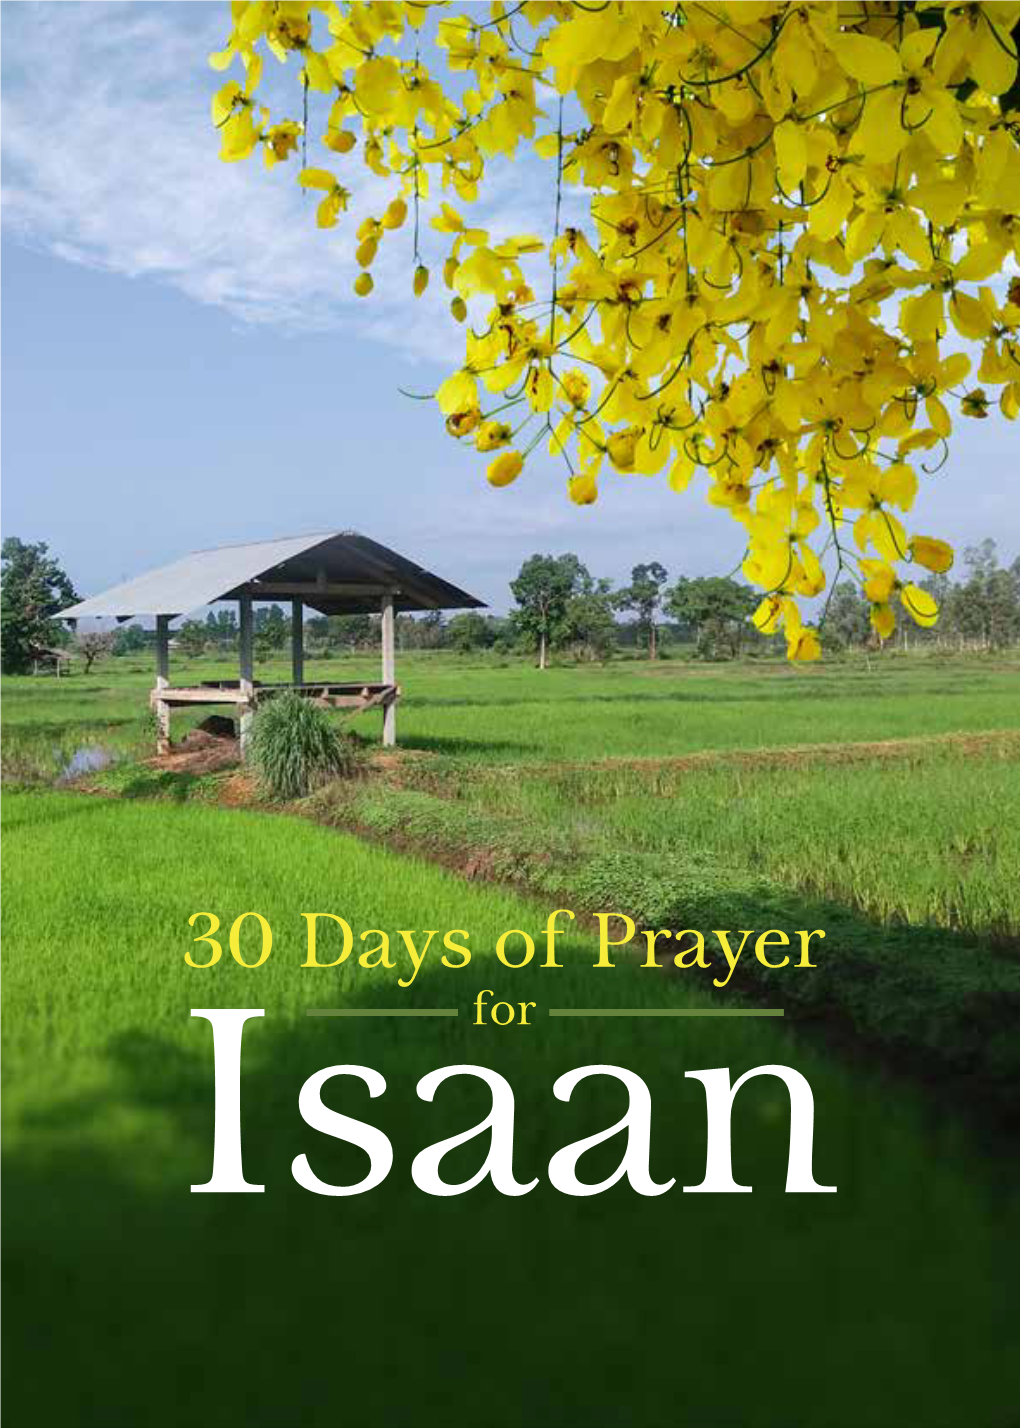 30 Days of Prayer for Isaan Covers Topics Which Are True for Isaan People Across the Region Including Social Issues and Character Traits